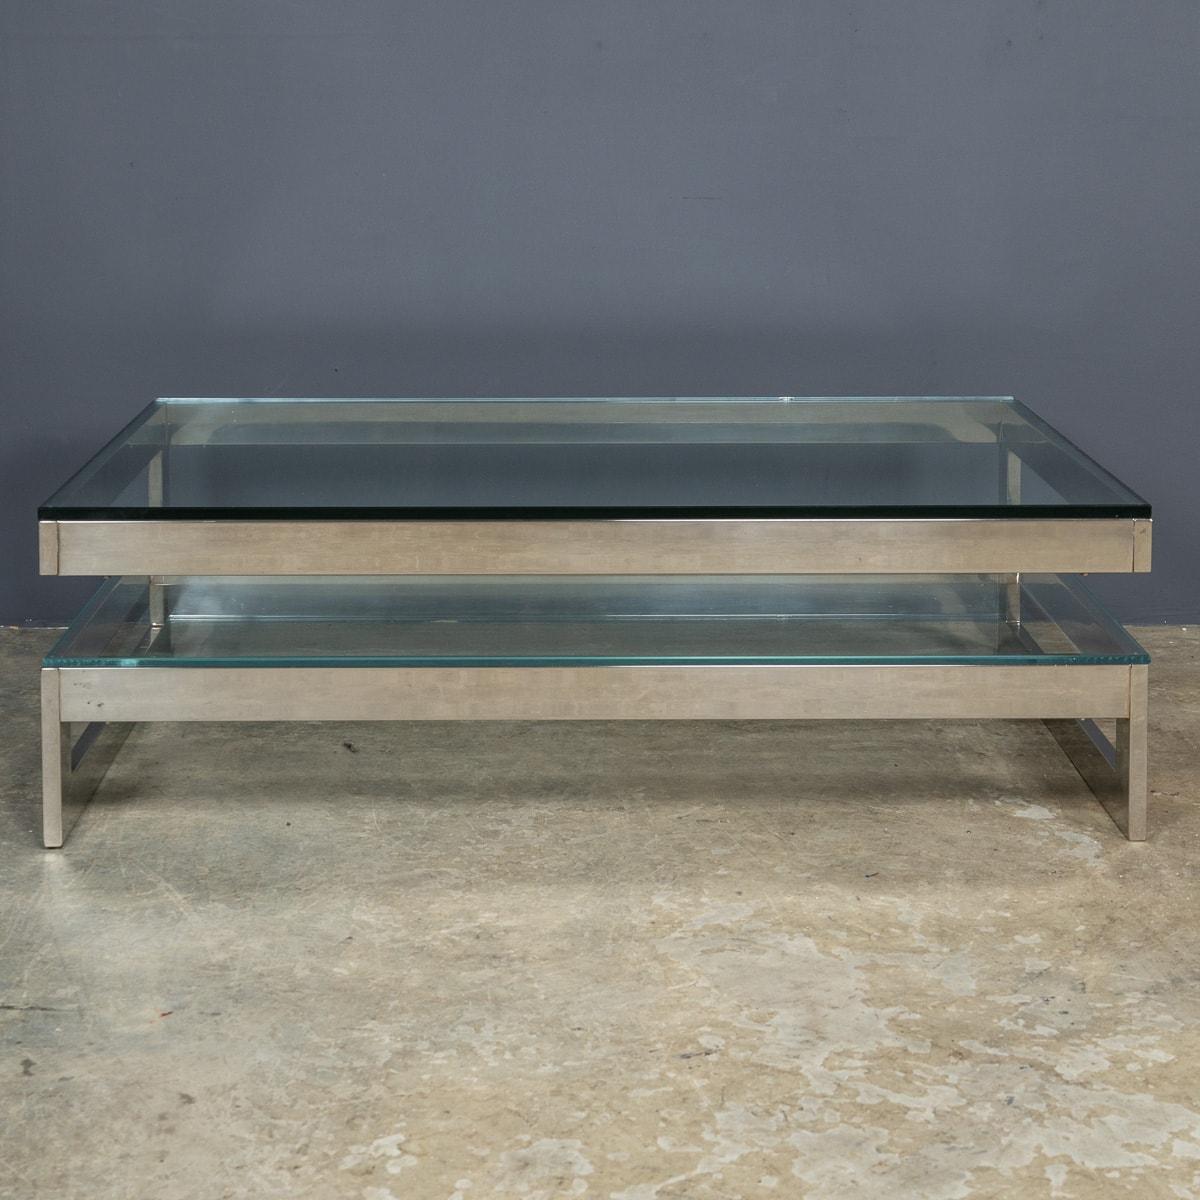 Mid-Century Modern 20th Century Polished Metal & Glass Coffee Table By Belgo Chrome, Belgium c.1970 For Sale